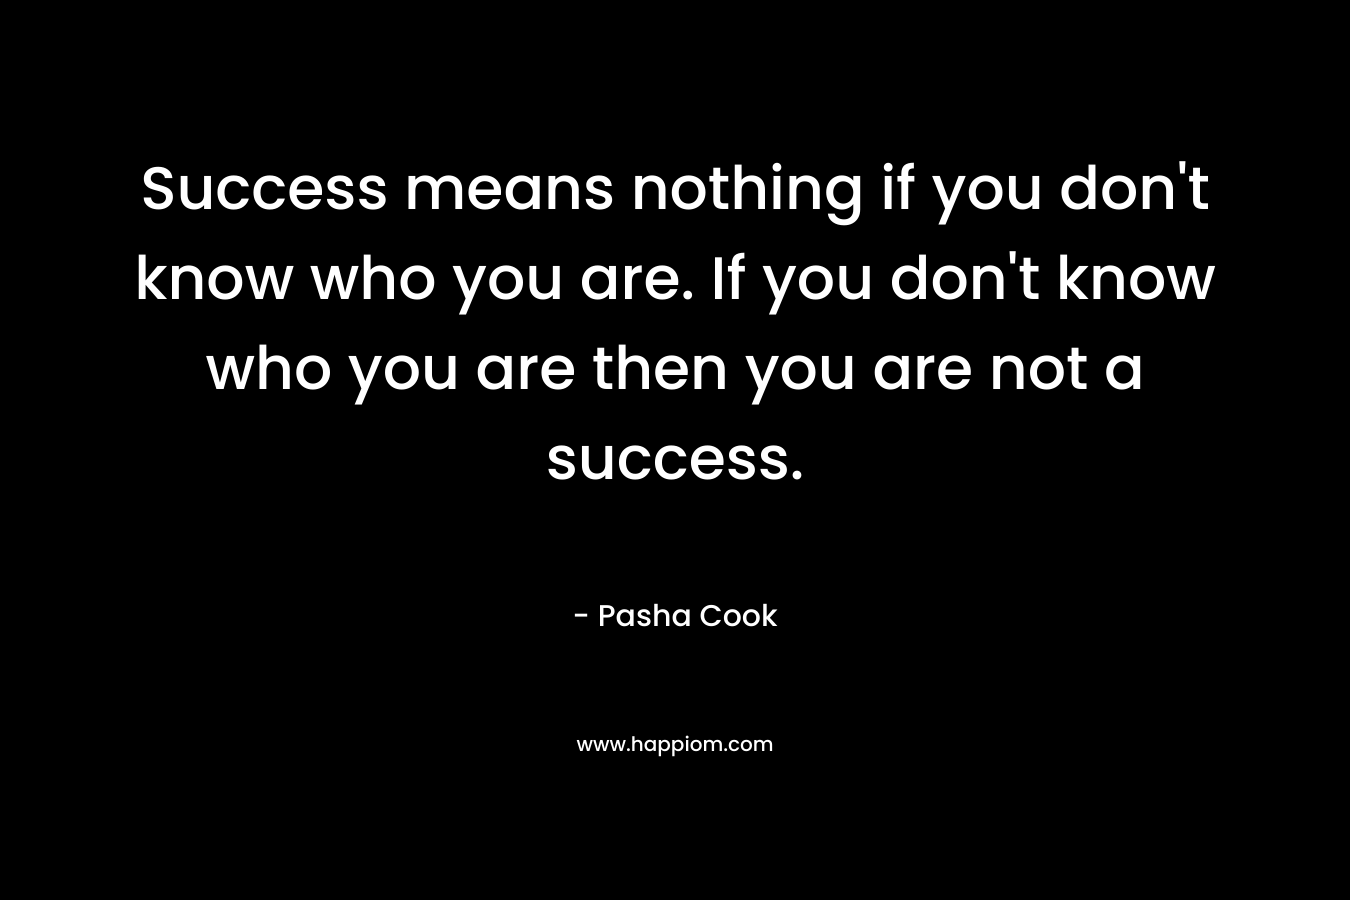 Success means nothing if you don't know who you are. If you don't know who you are then you are not a success.